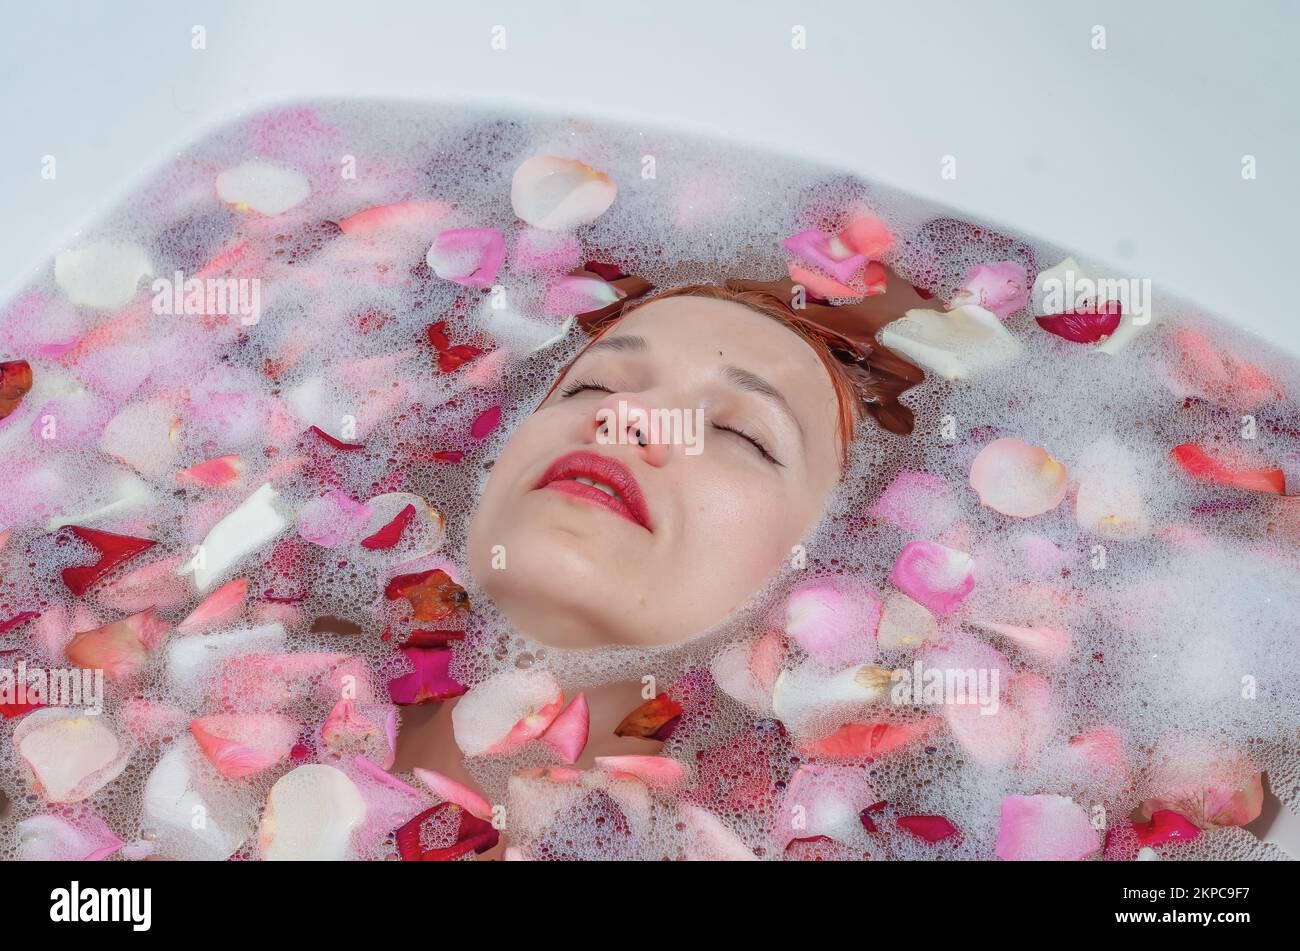 Close up female face in bath with soft white glowing and rose petals. Copyspace for advertising. Beauty, fashion, style, bodycare concept. Attractive Stock Photo